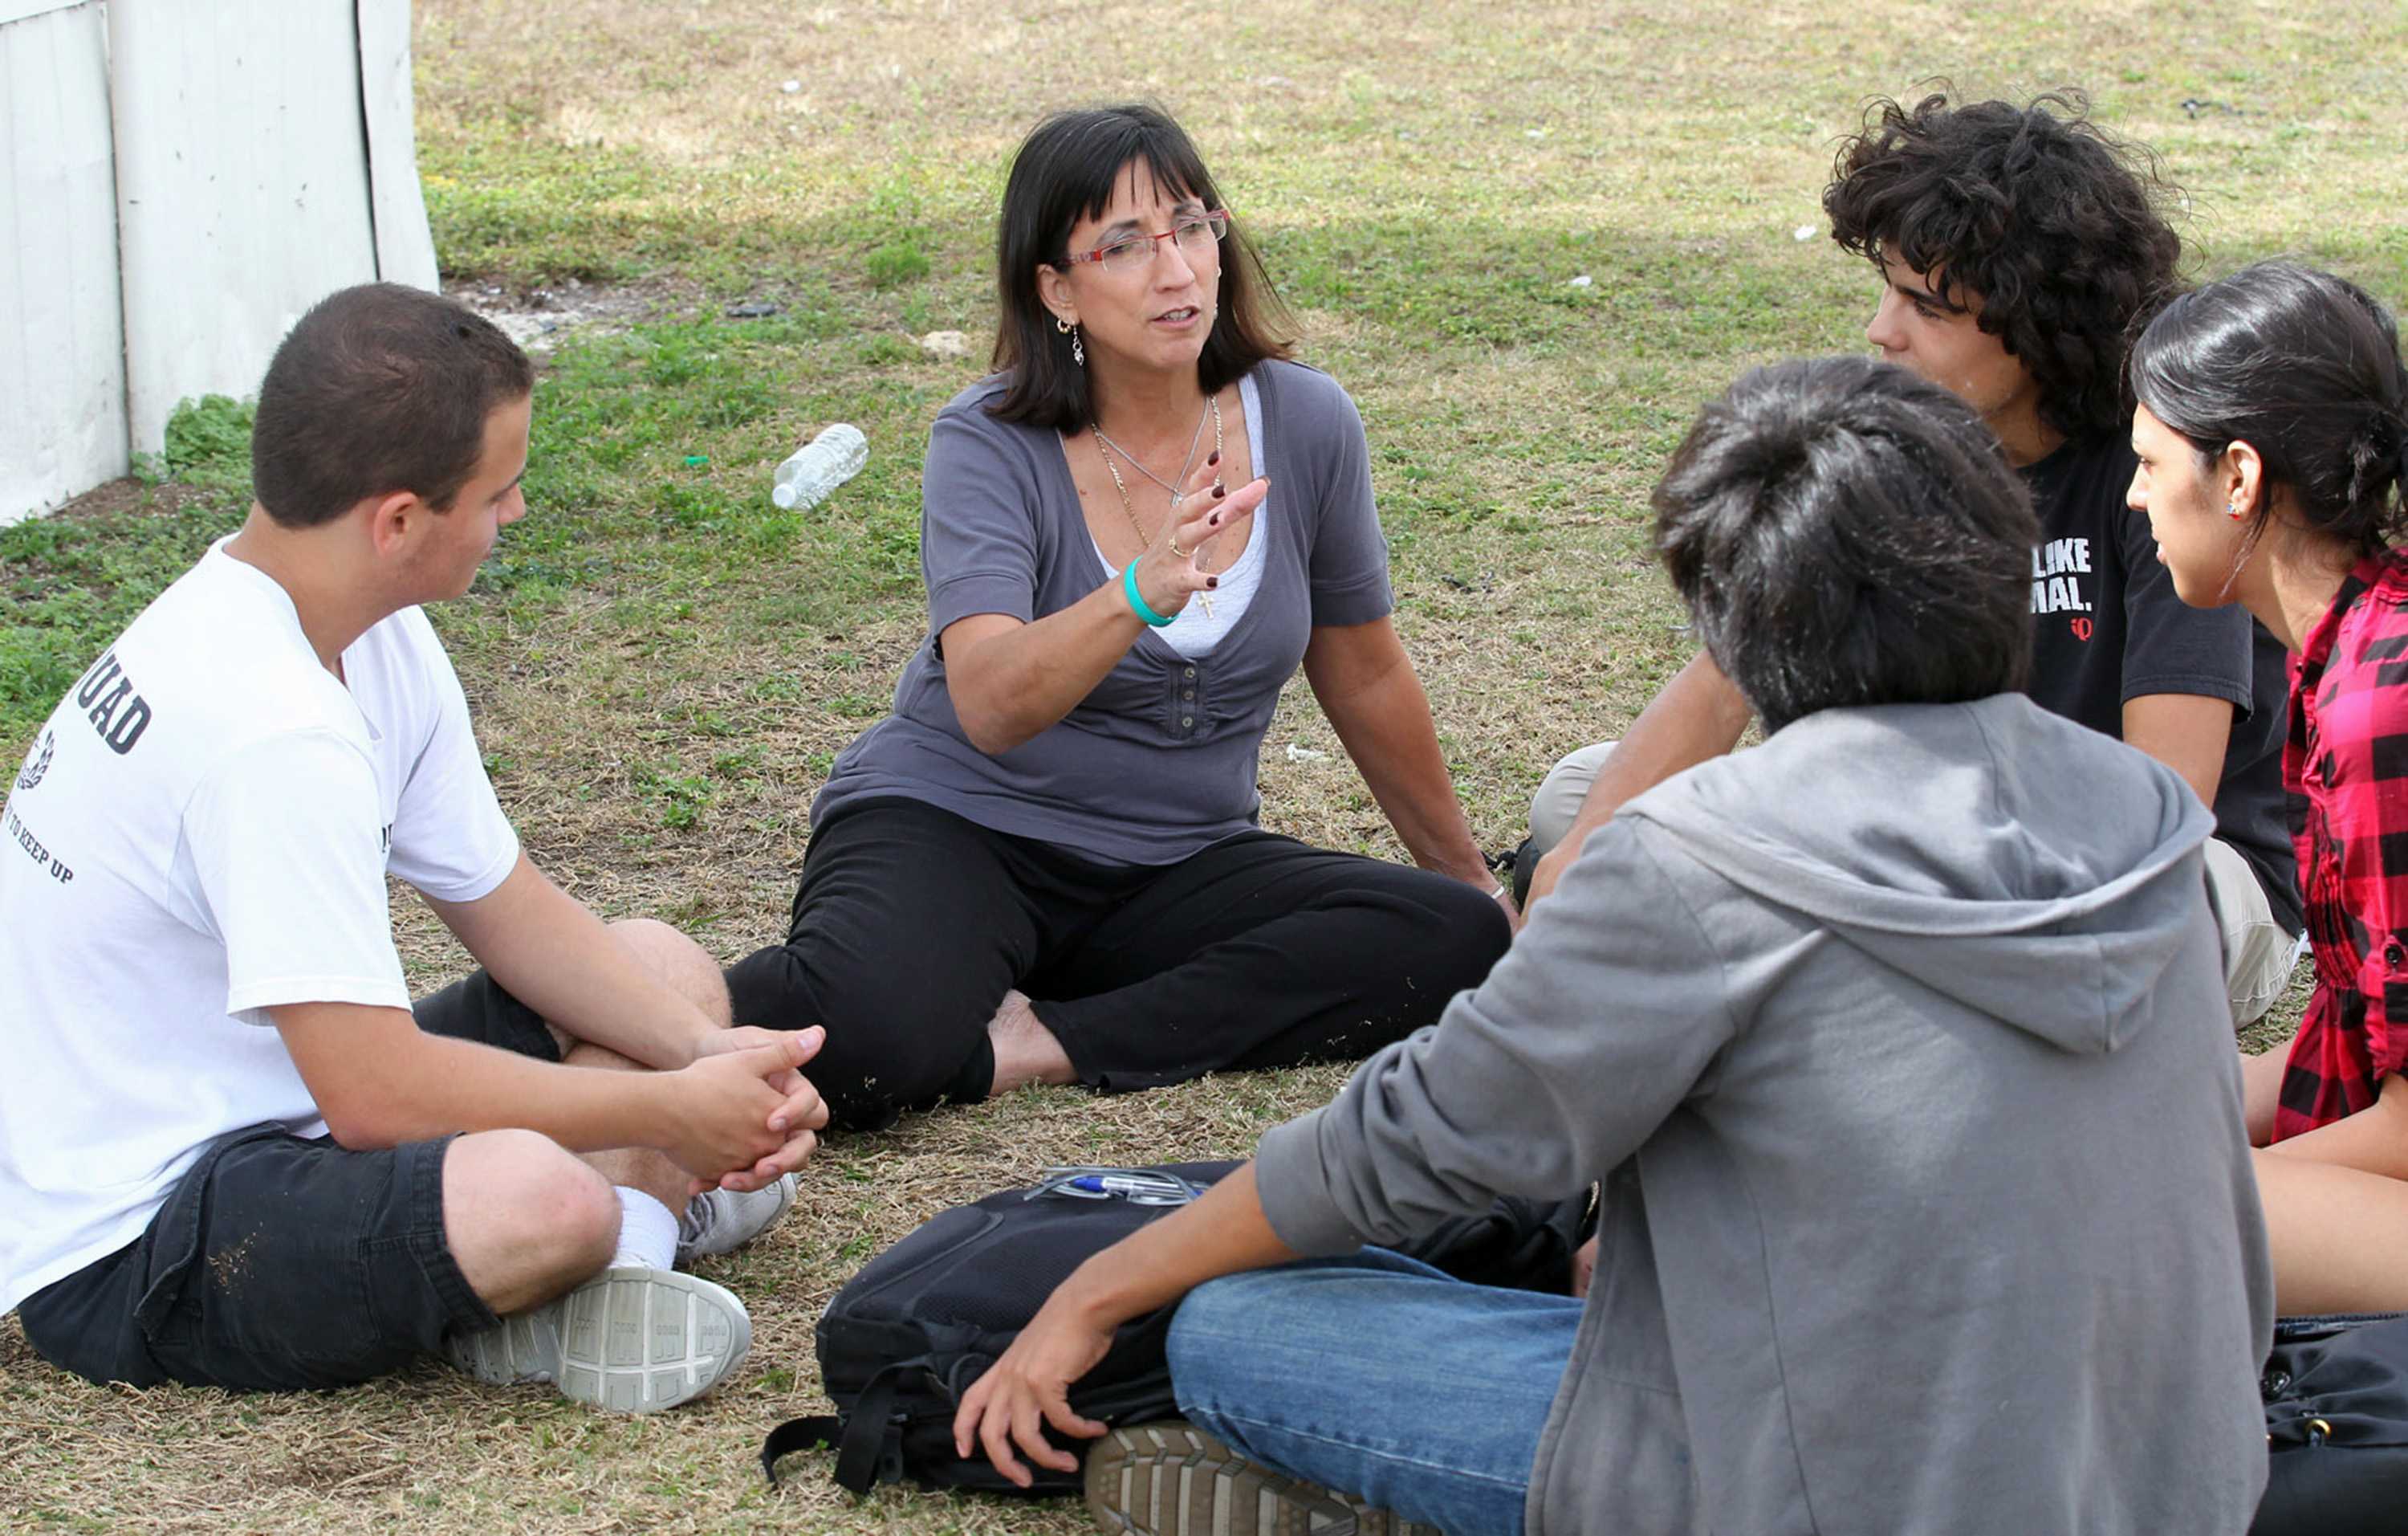 Woman+speaks+to+small+group+of+students